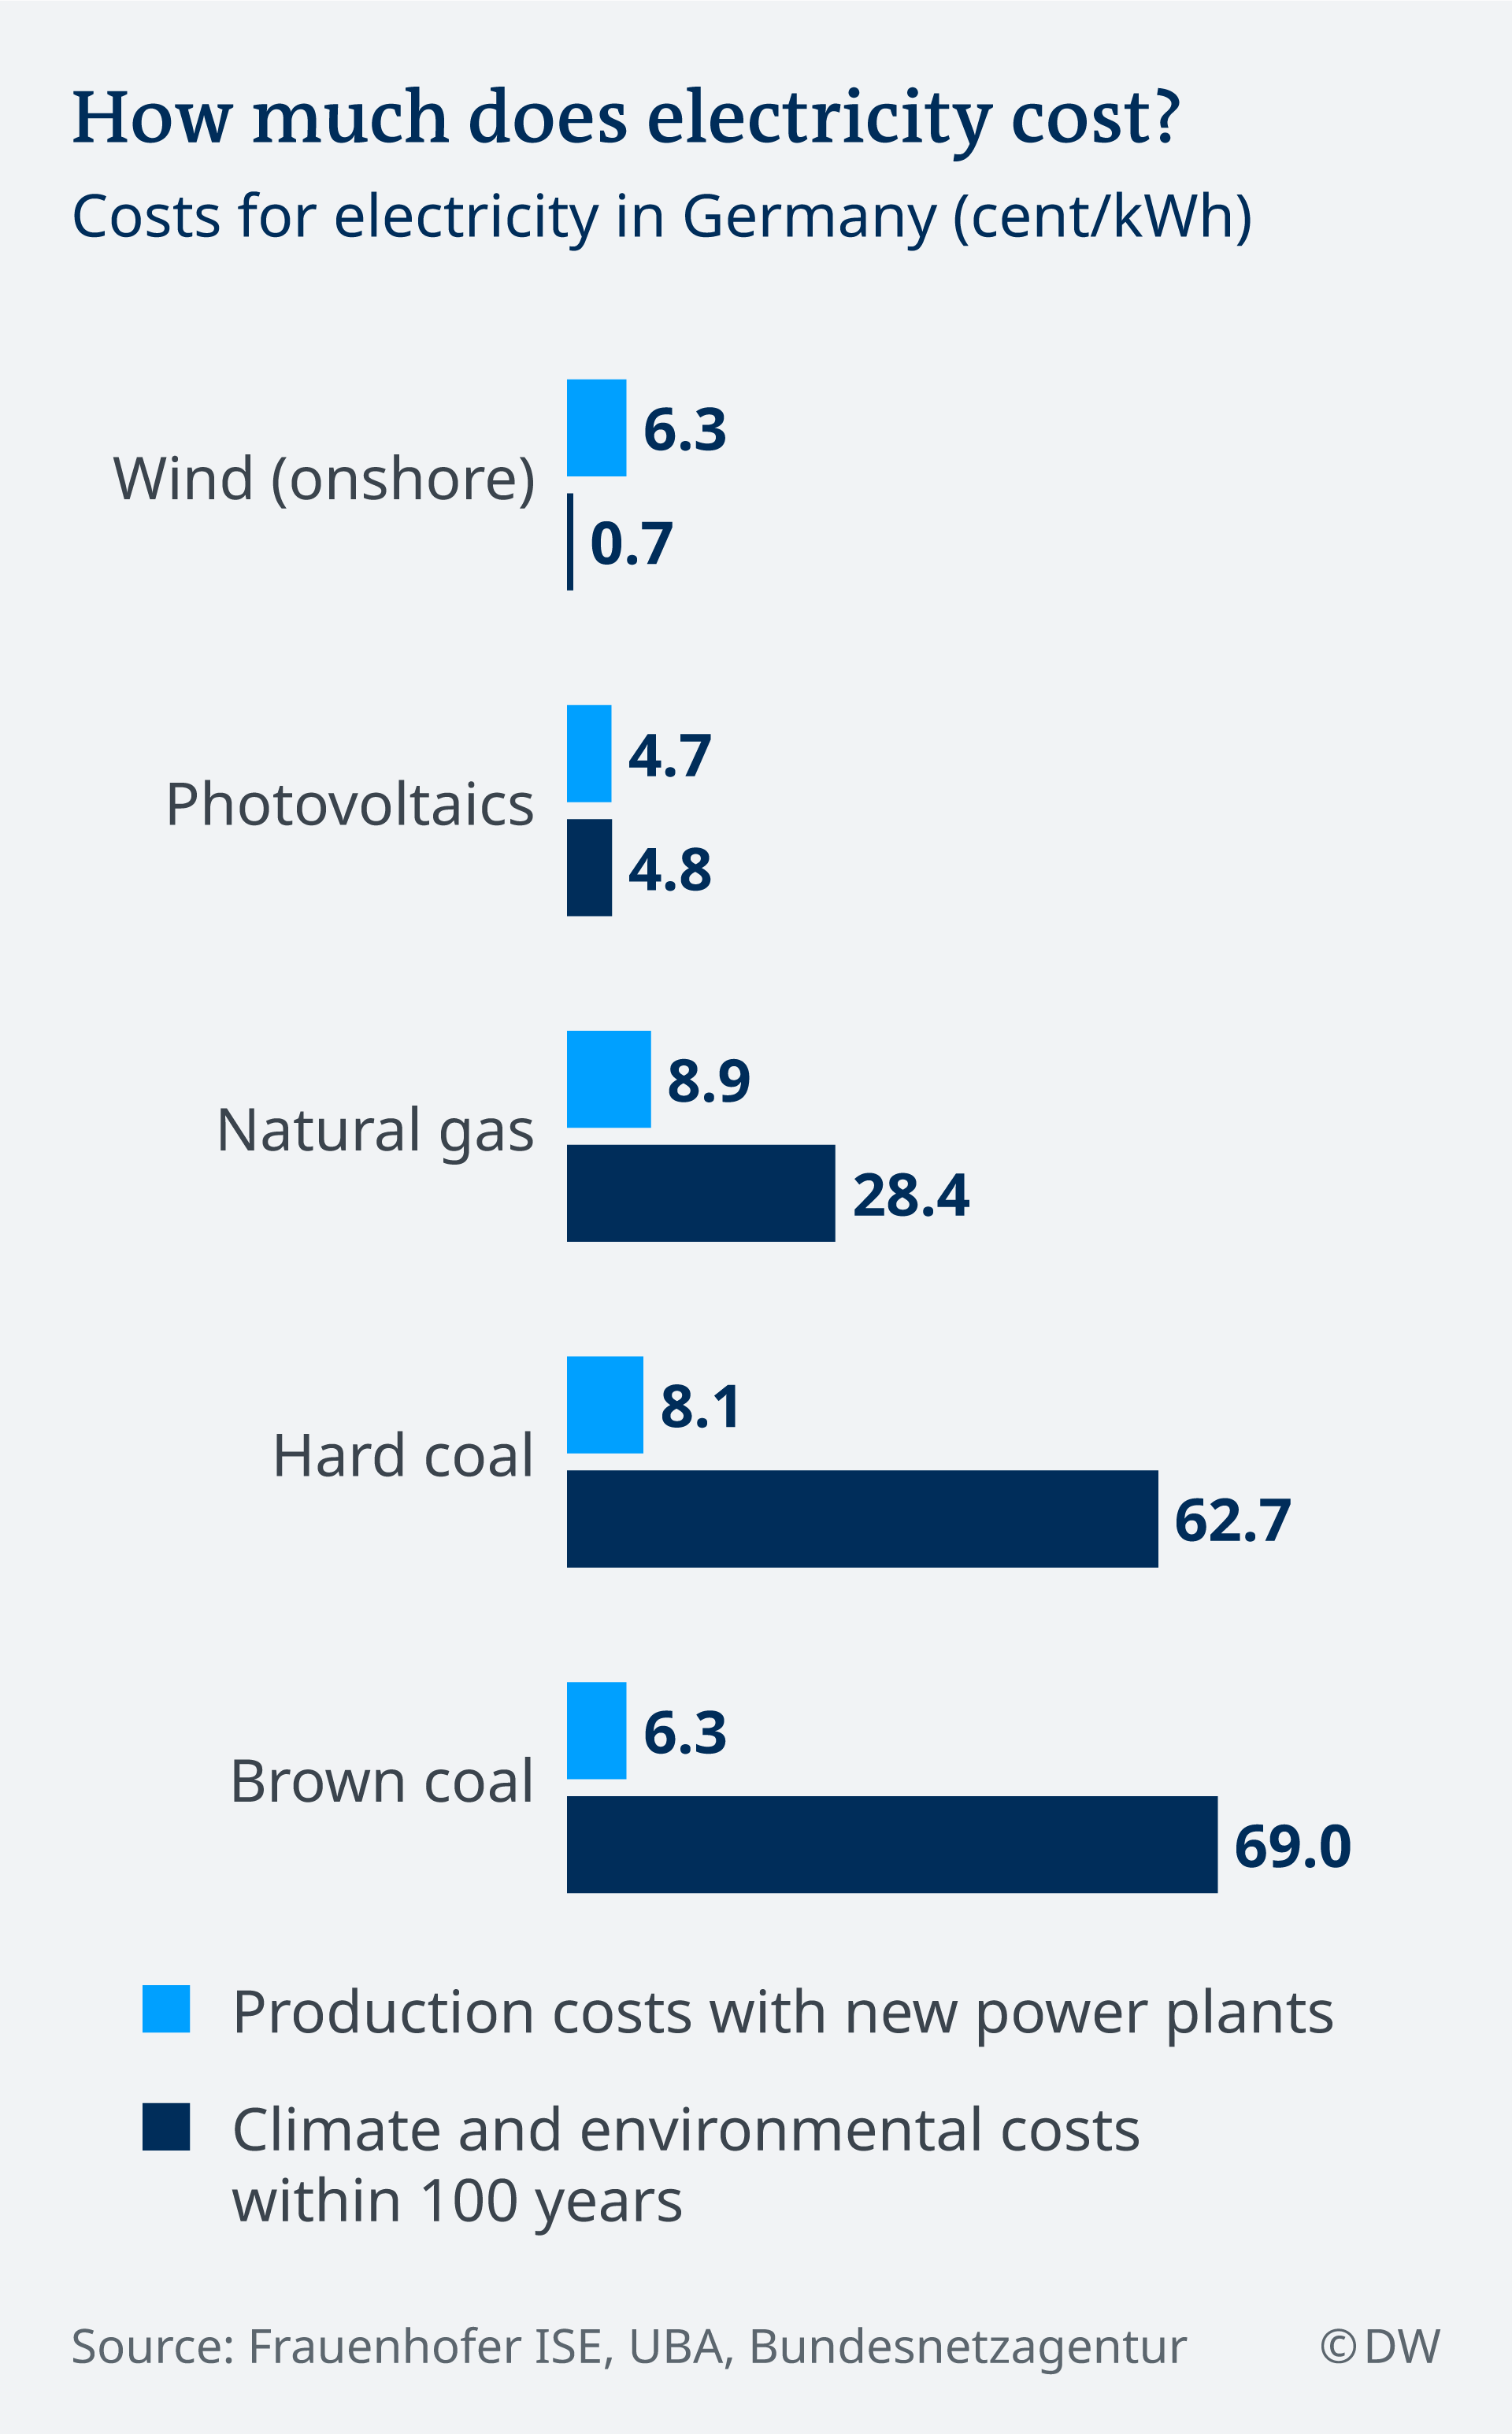 An infographic explaining how much different kinds of electricity costs in Germany. Onshore wind power is by far the cheapest, while hard coal and brown coal is the most expensive.